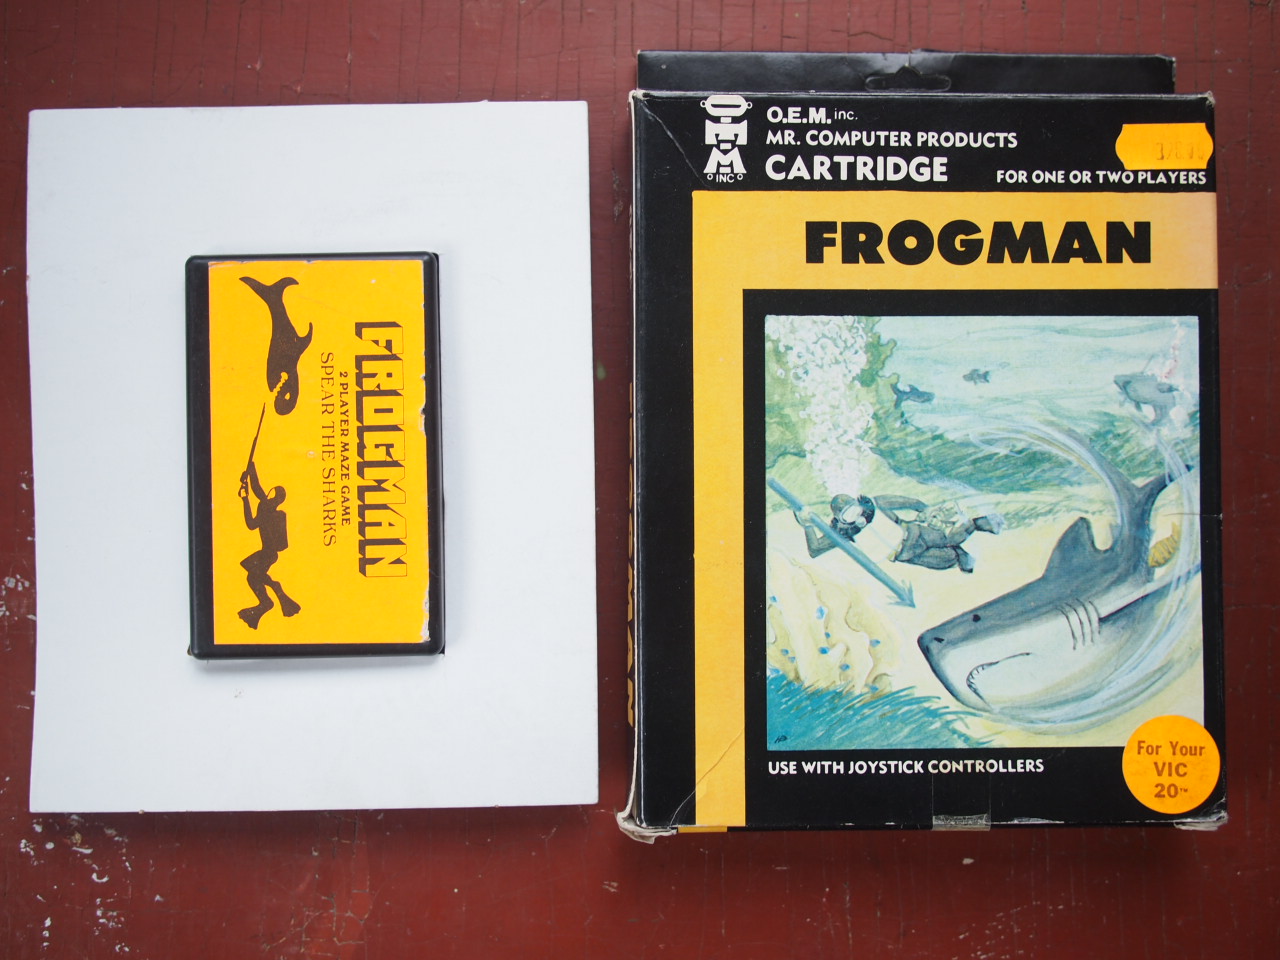 Frogman OEM/Mr.Computer Products (complete in box)